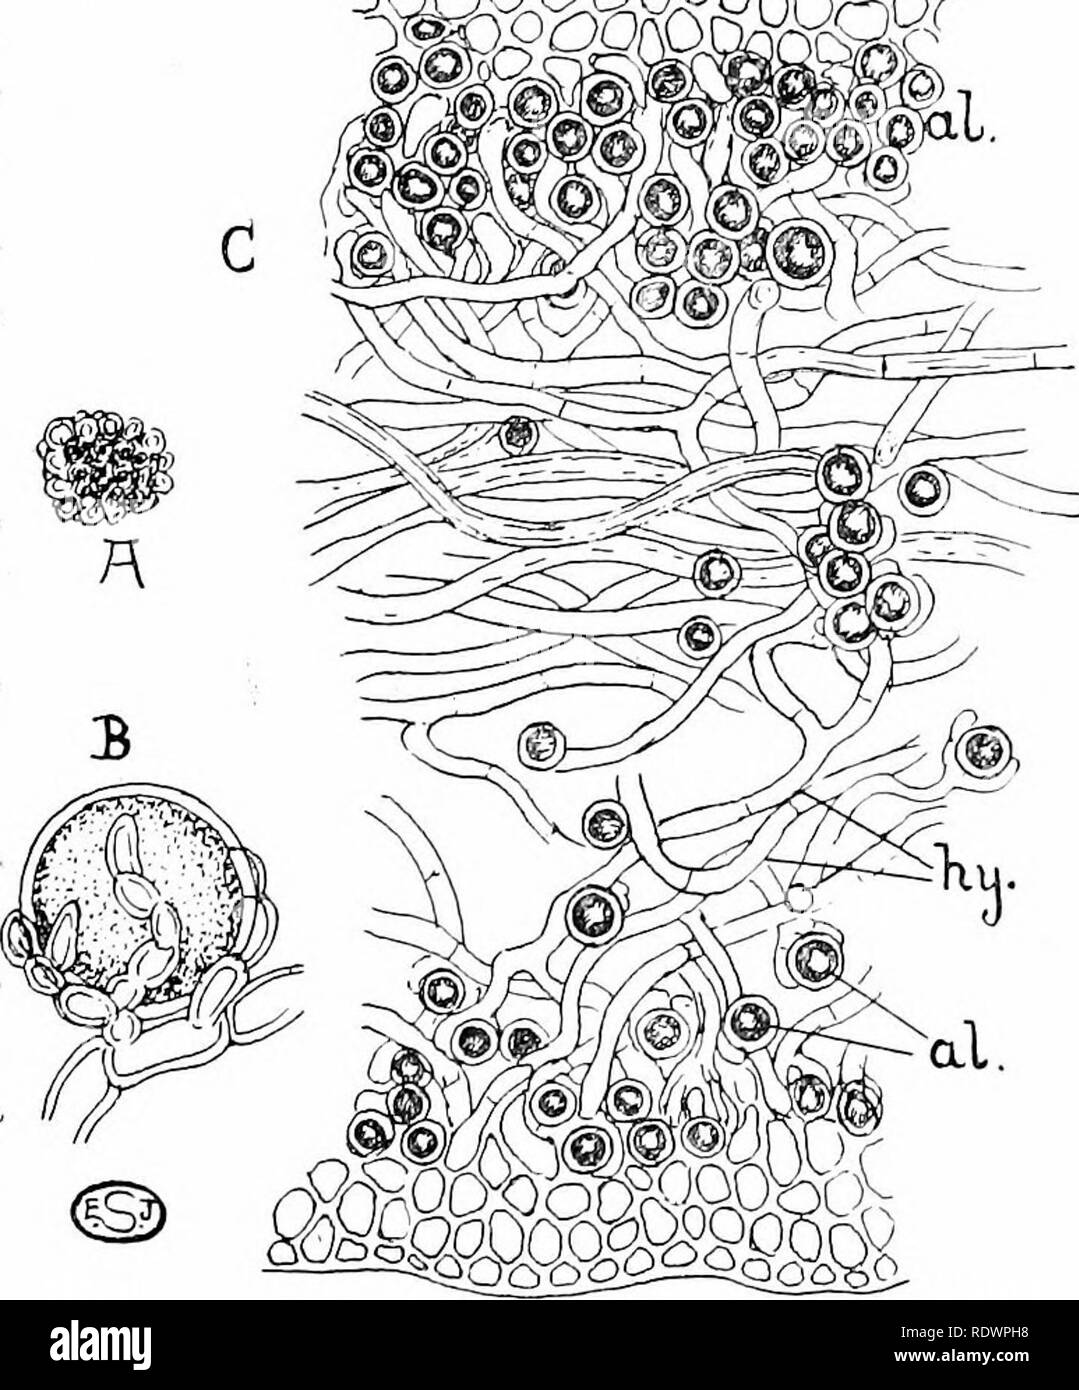 An introduction to the structure and reproduction of plants. Plant anatomy;  Plants. 26o LICHENS ^-g^^^^^^^^^dmsj scattered throughout the thallus [.  Collema) or occupying definite zones (. XantJwria parietina, Fig. 142,  C).